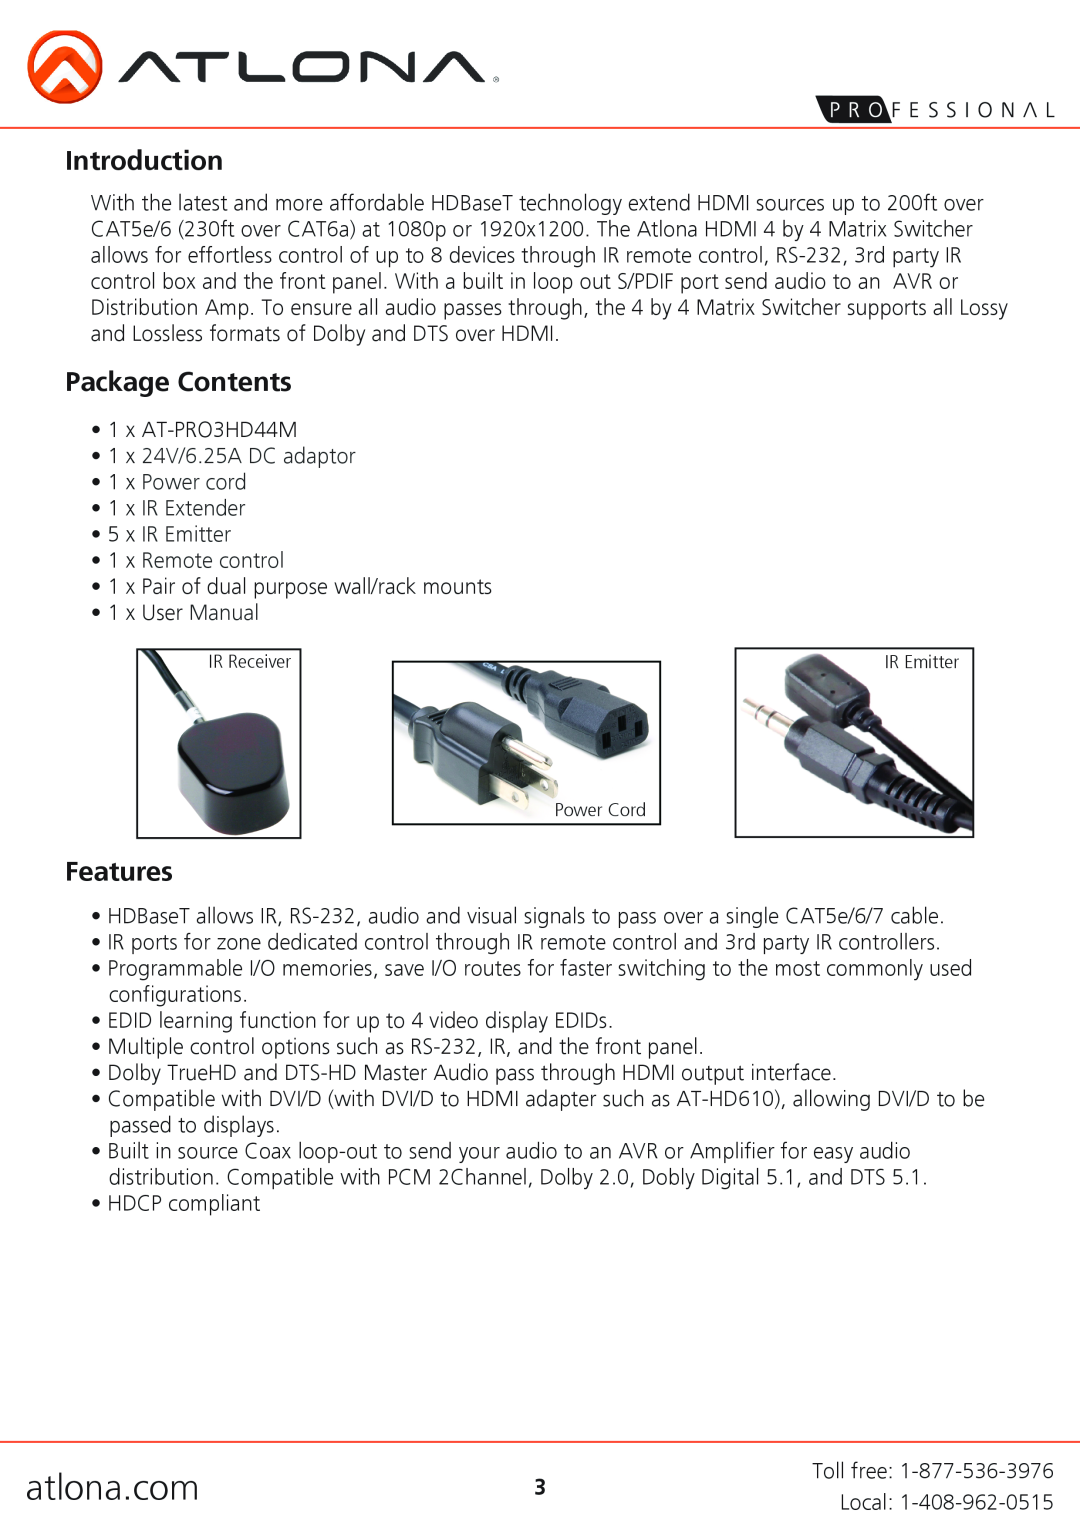 Atlona AT-PRO3HD44M user manual Introduction, Package Contents, Features, atlona.com, x IR Emitter 1 x Remote control 